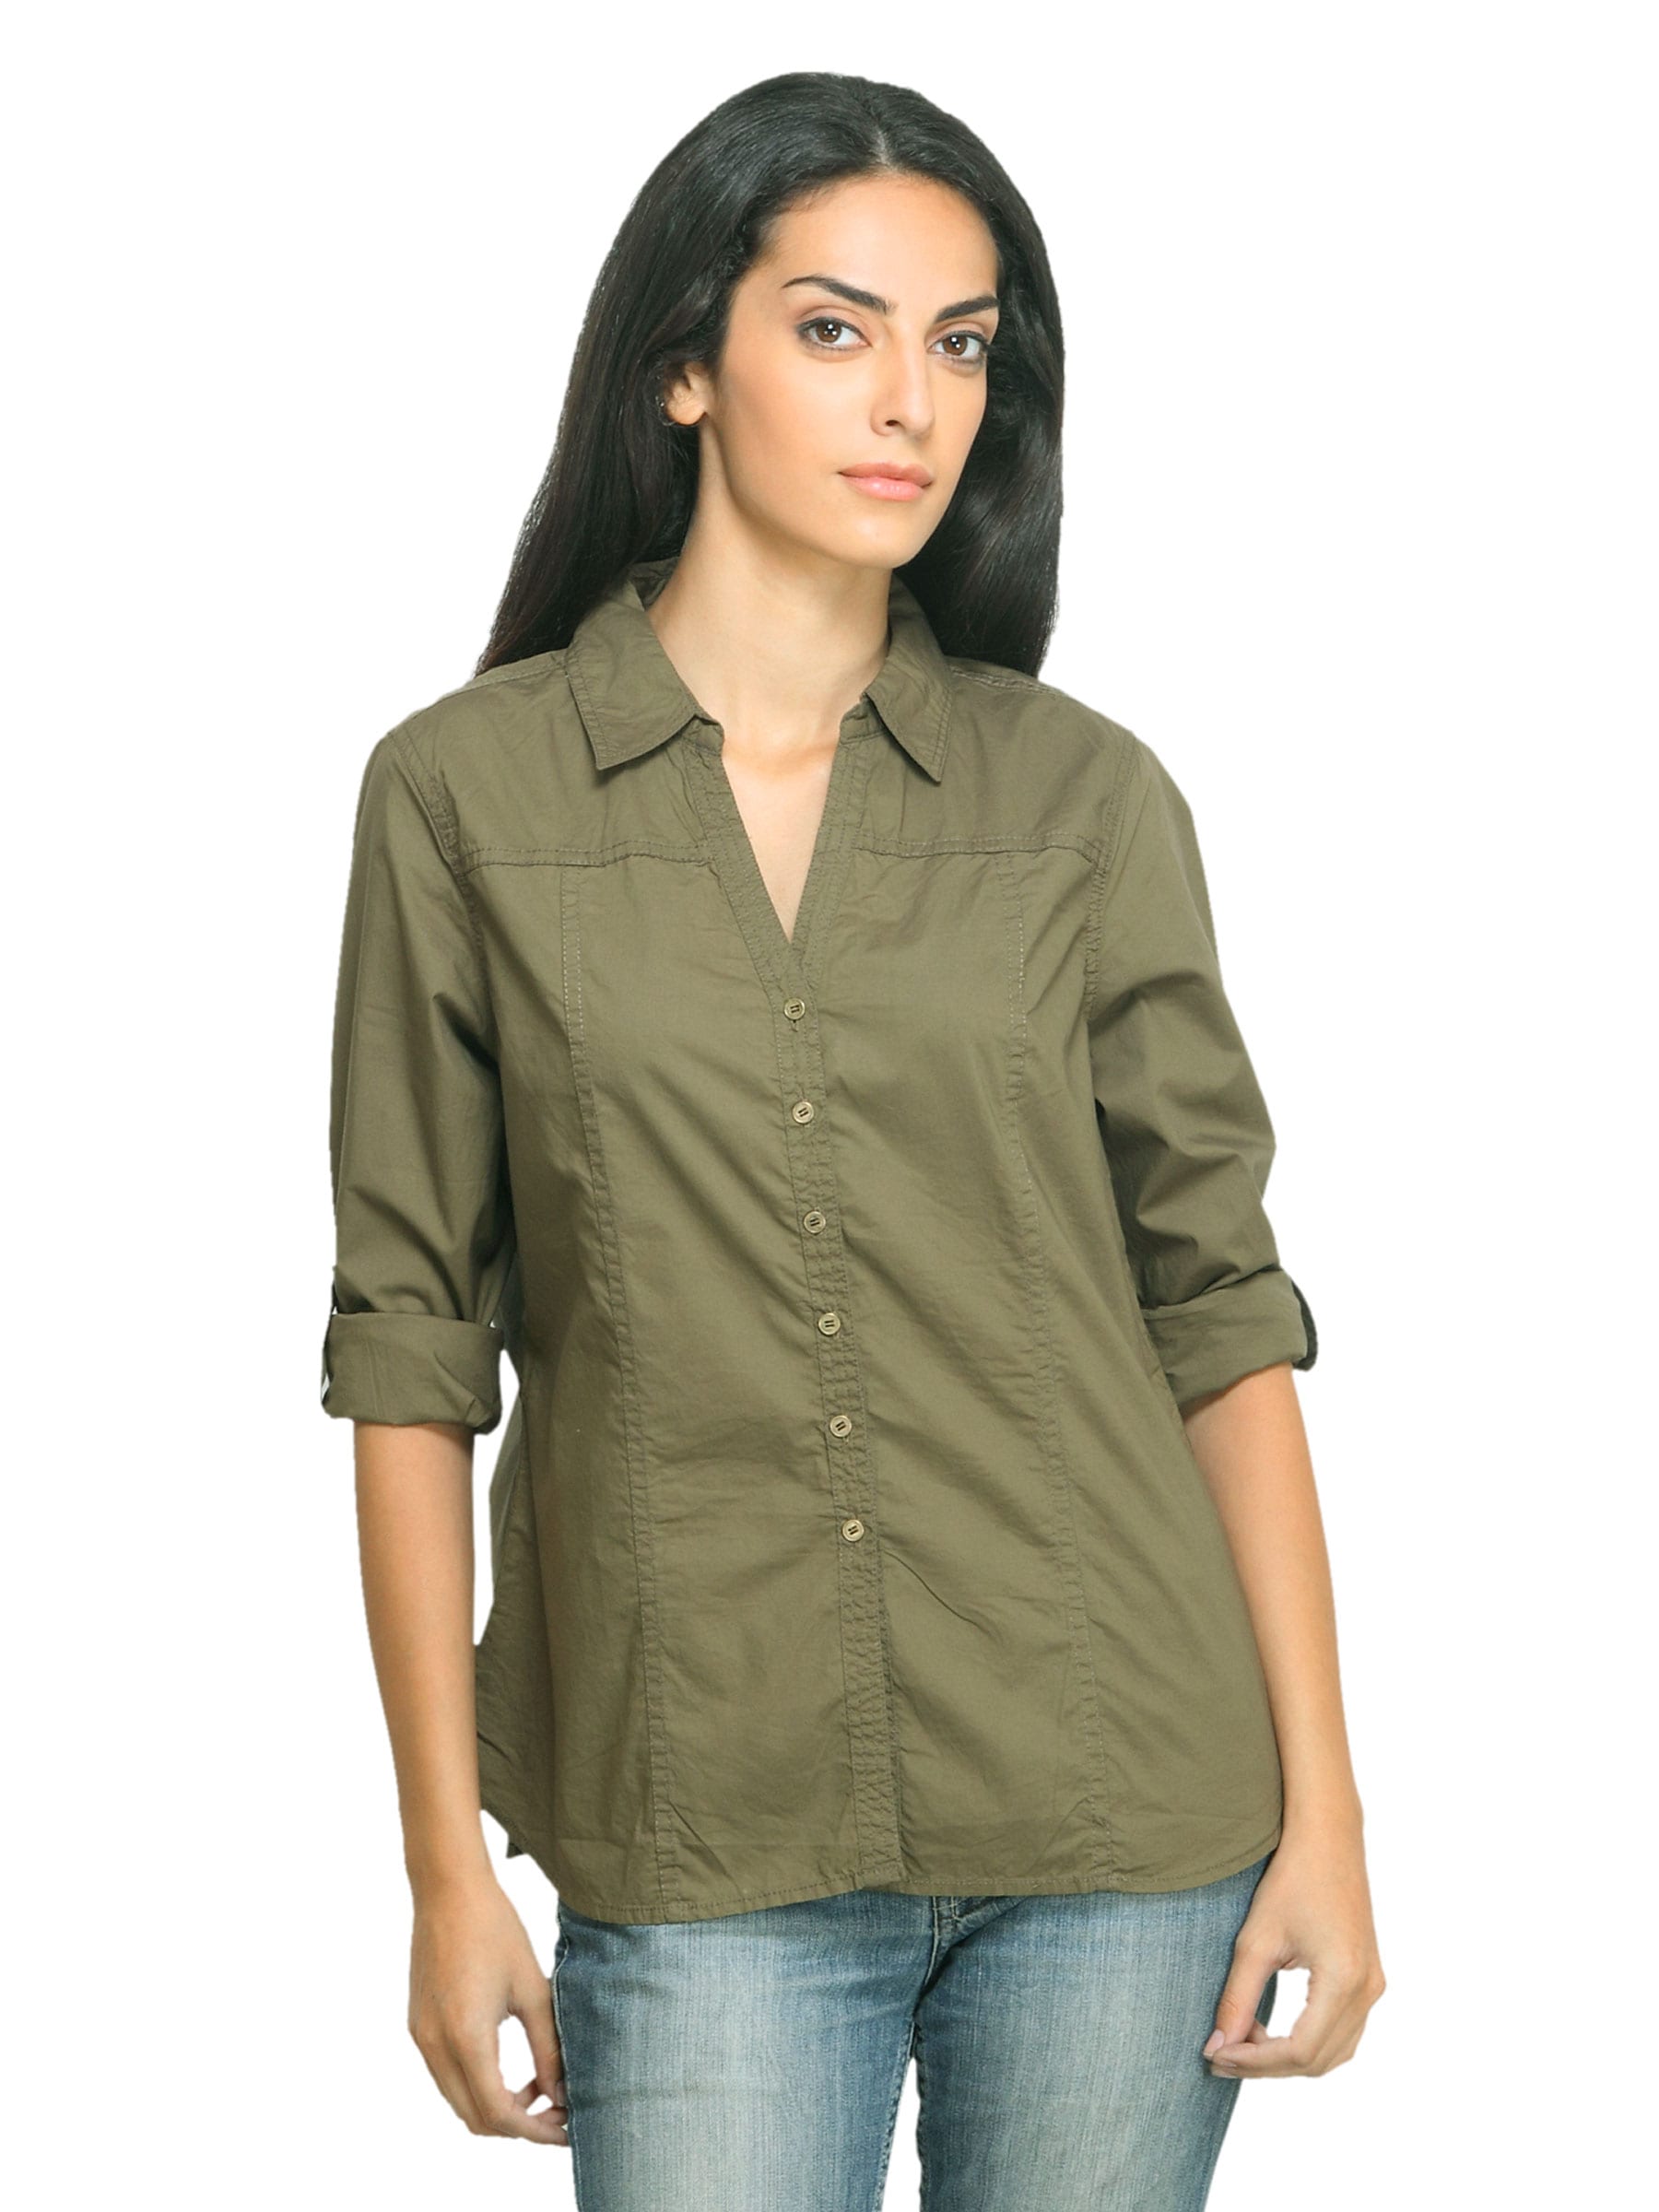 Scullers For Her Olive Shirt